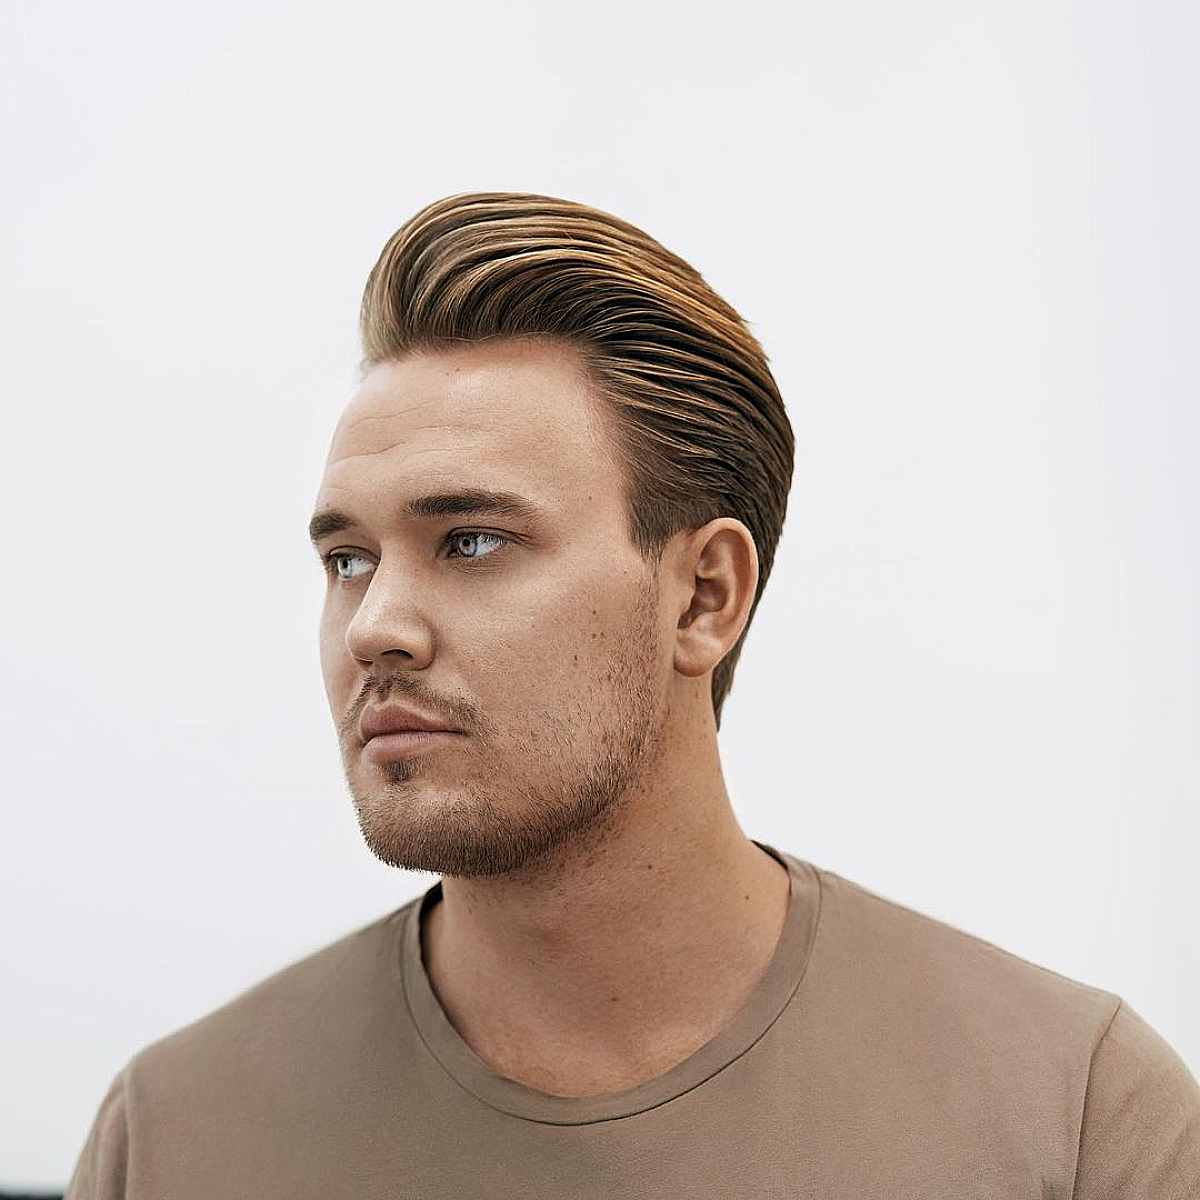 20 Of The Best Blowout Haircuts For Men in 2023 | FashionBeans